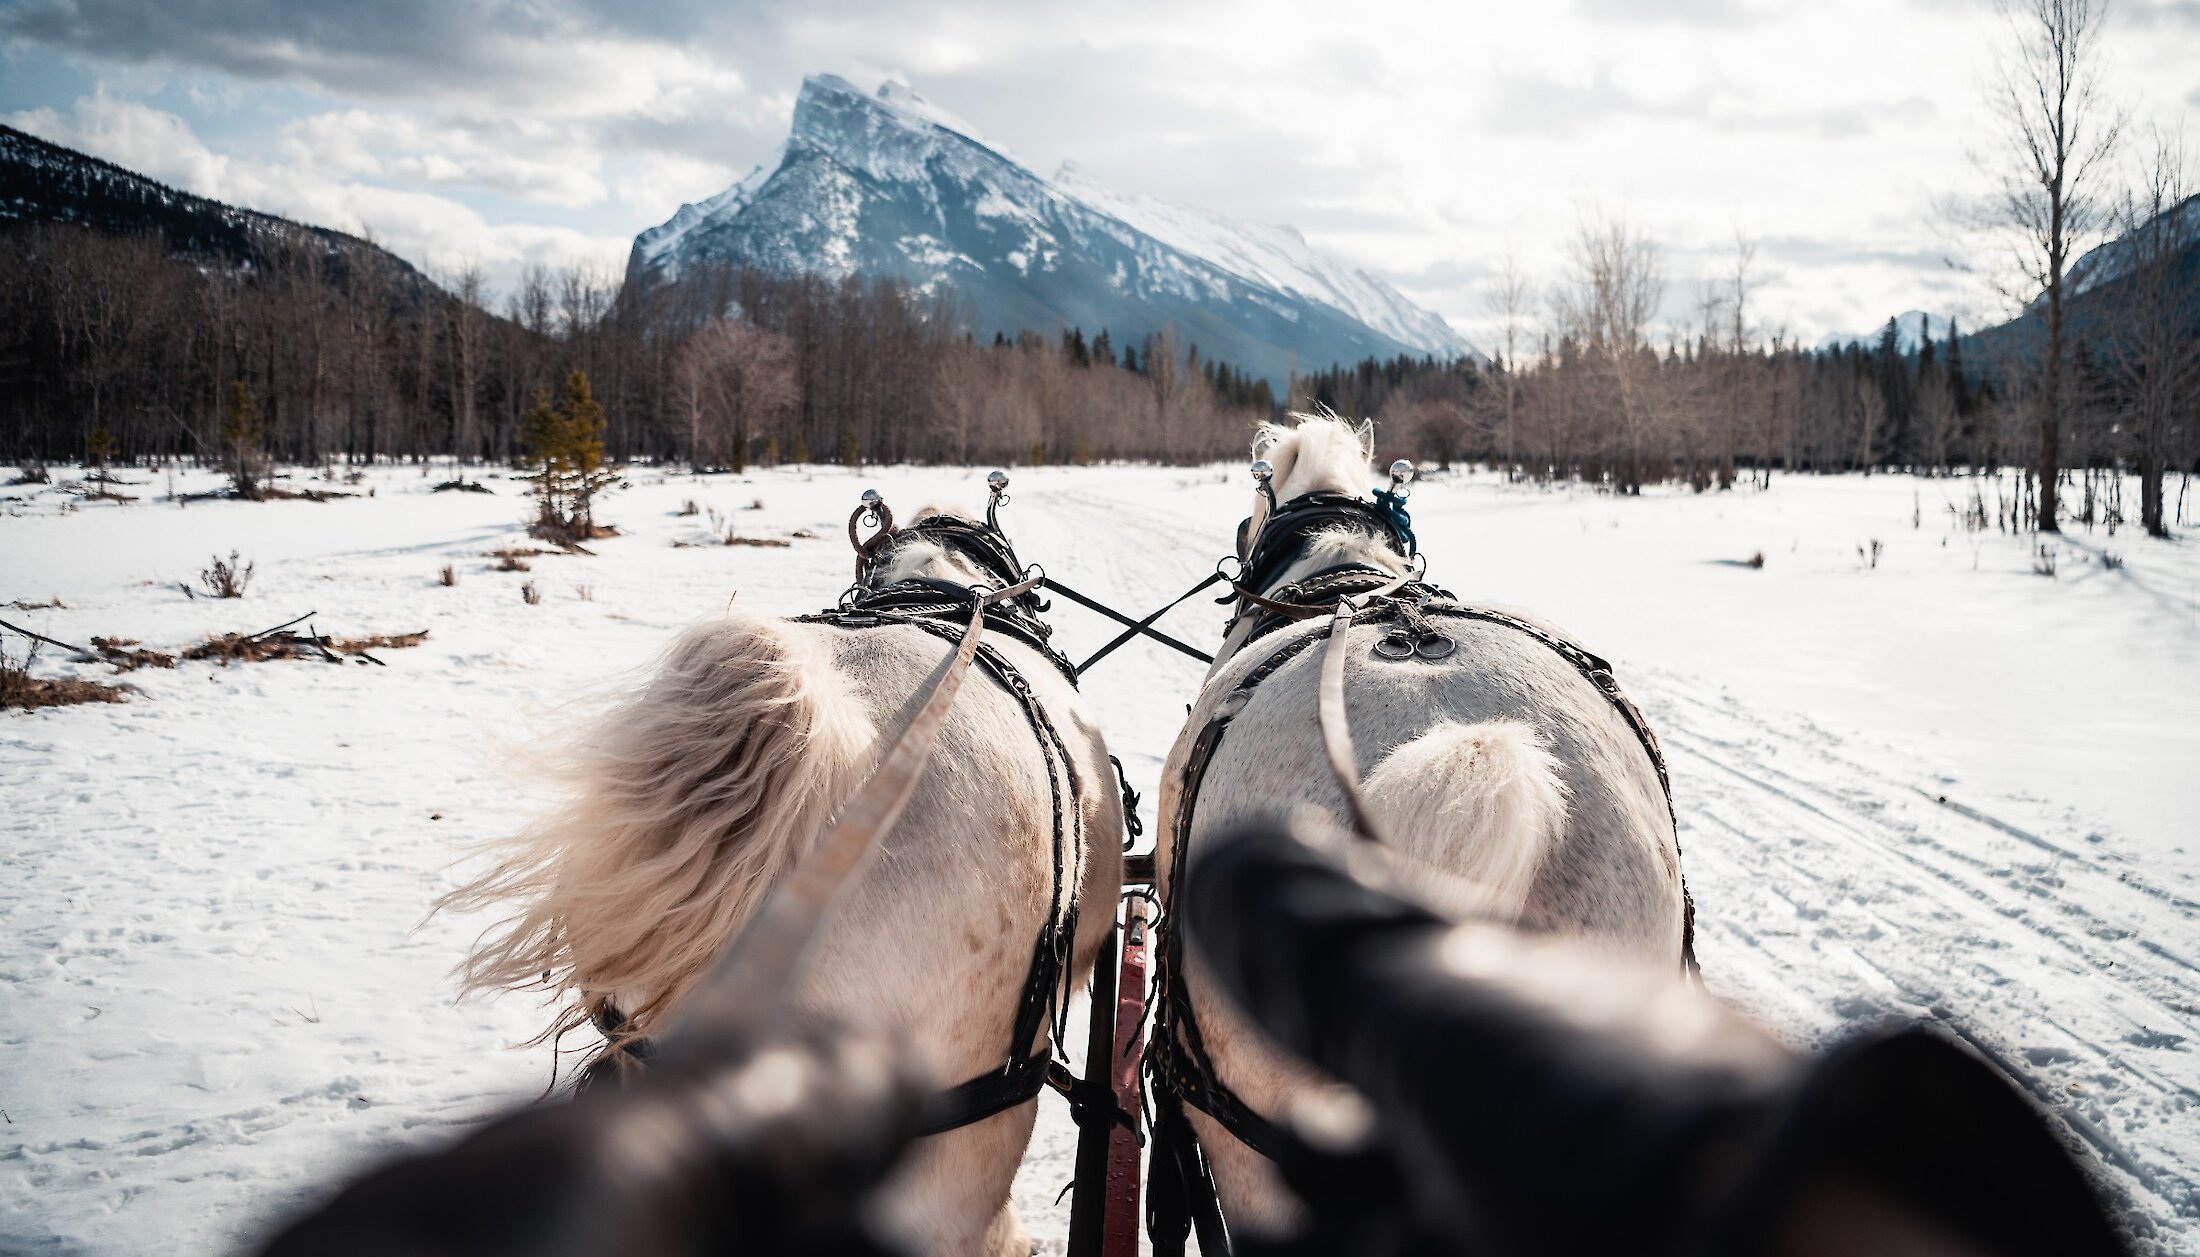 Views of Mount Rundle from the Banff sleigh ride